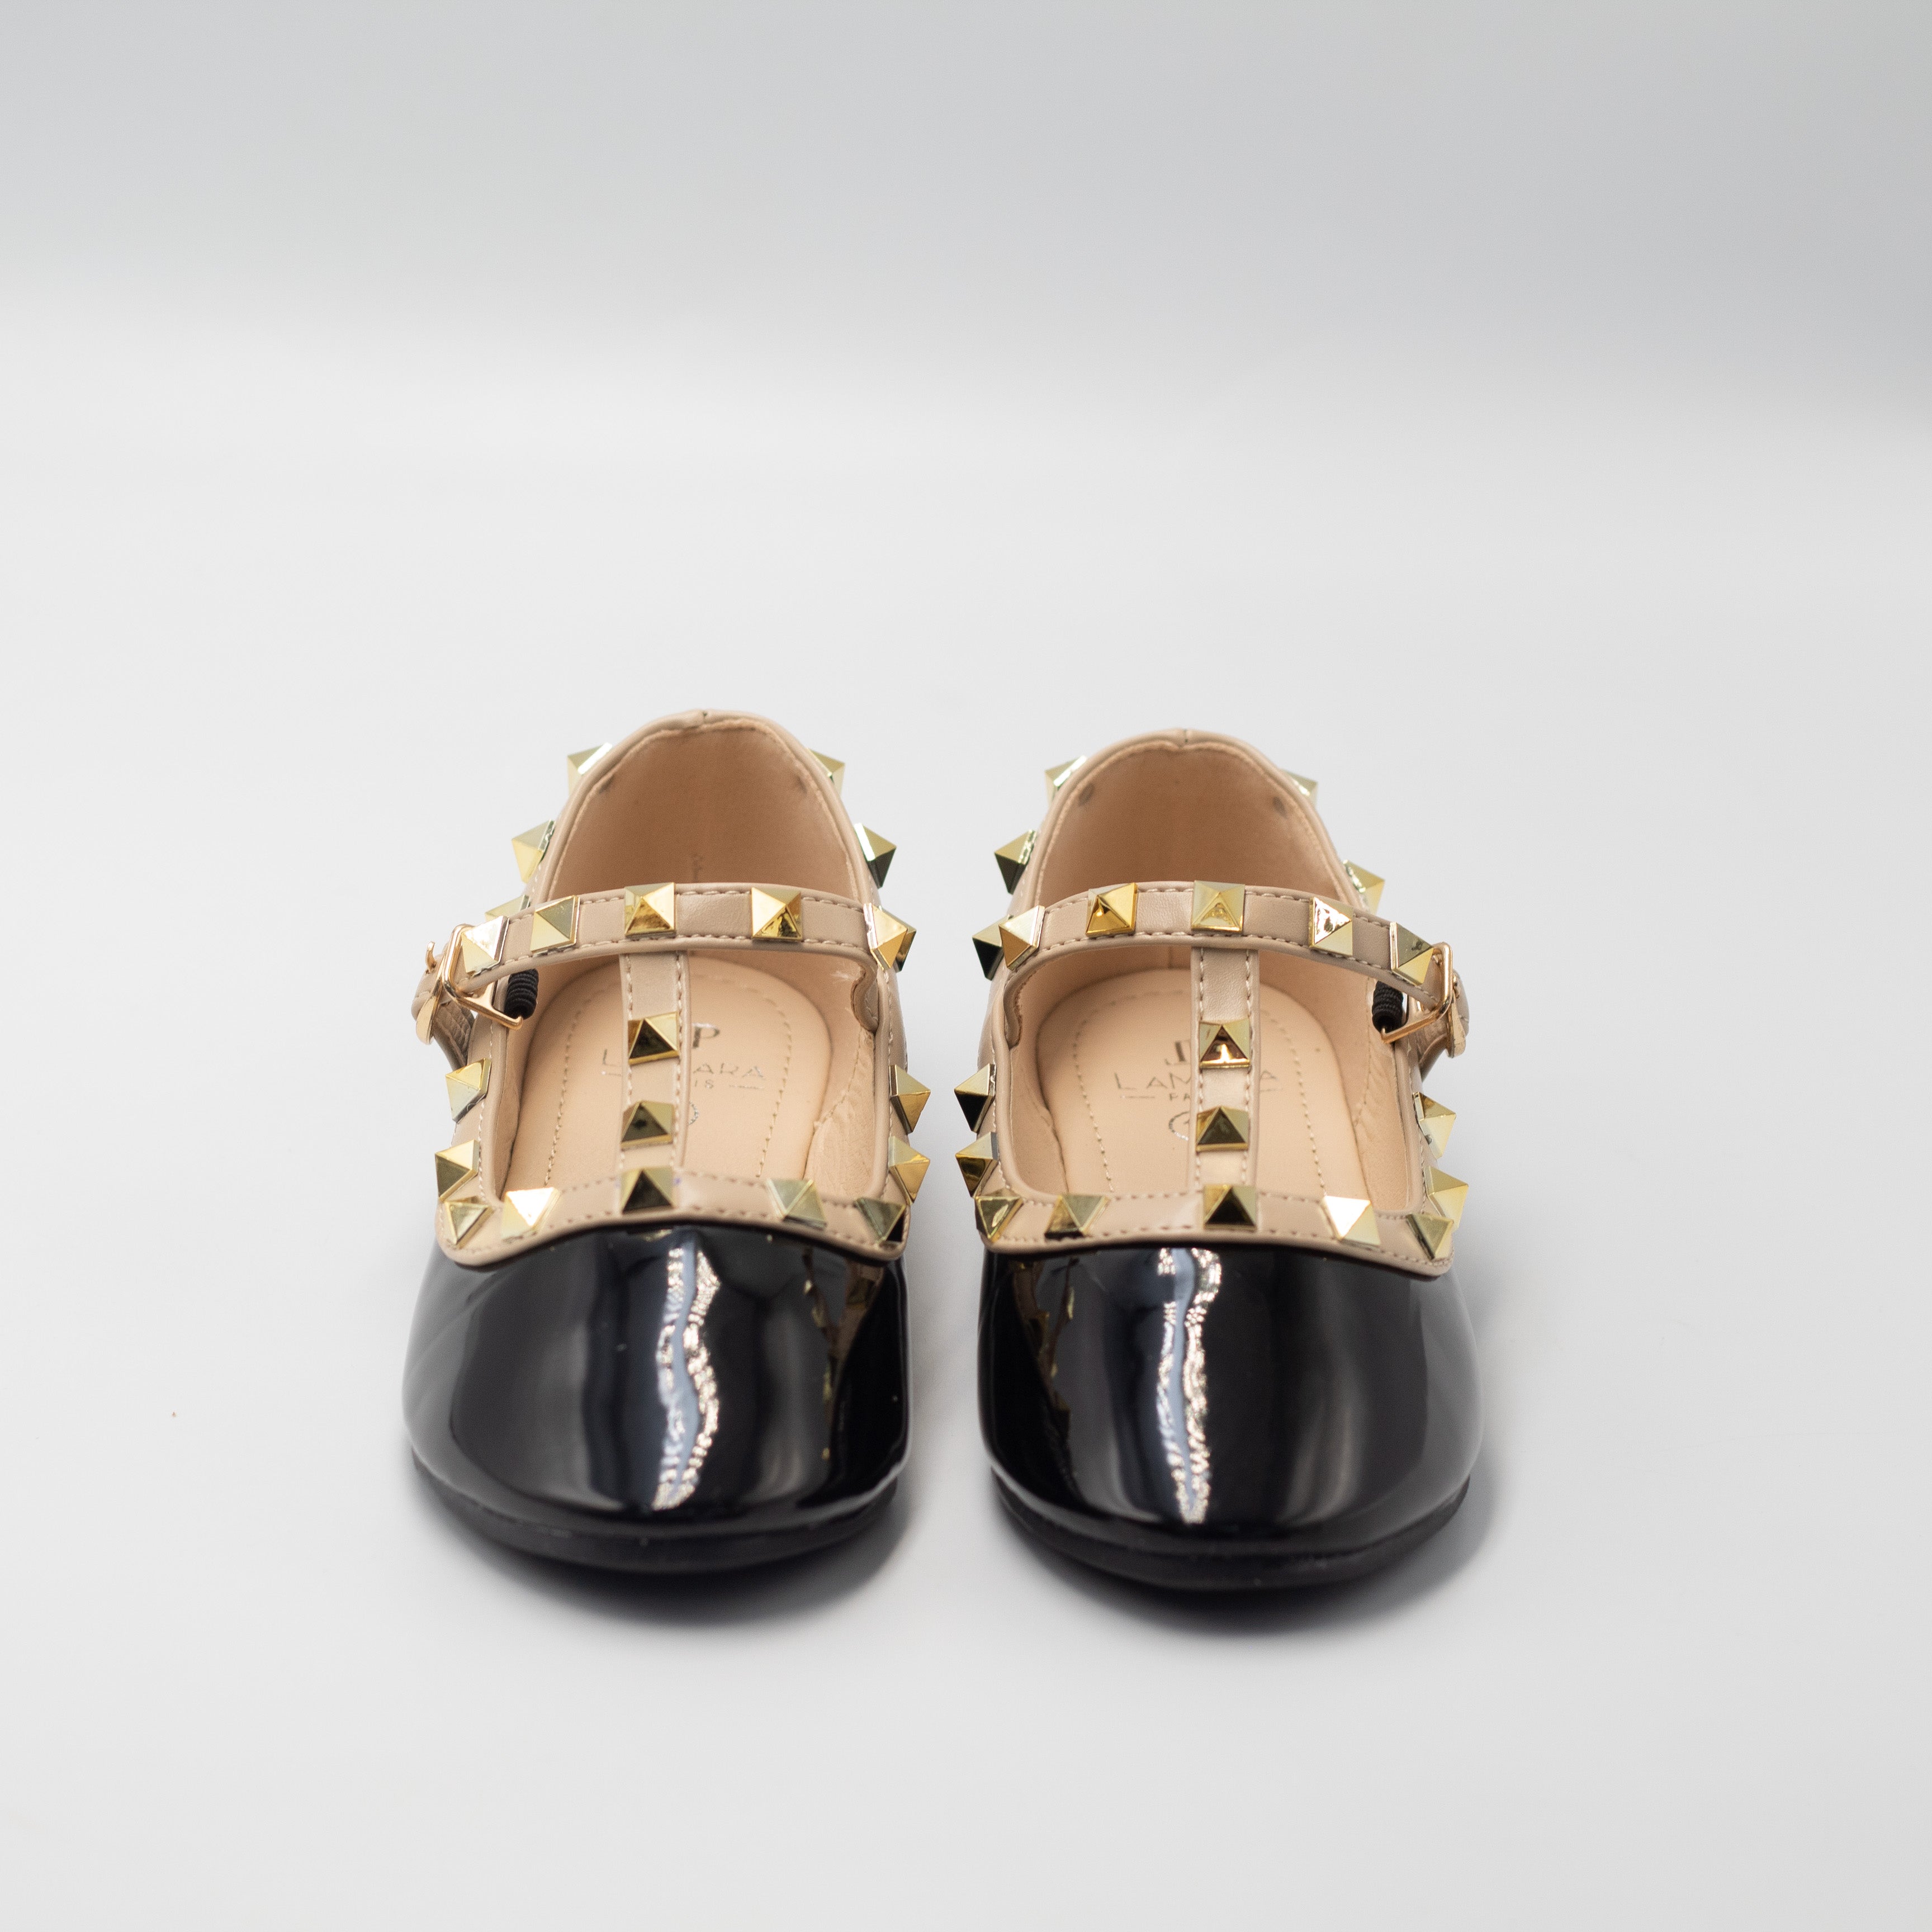 Black inf girls dress pump with studded detail caria